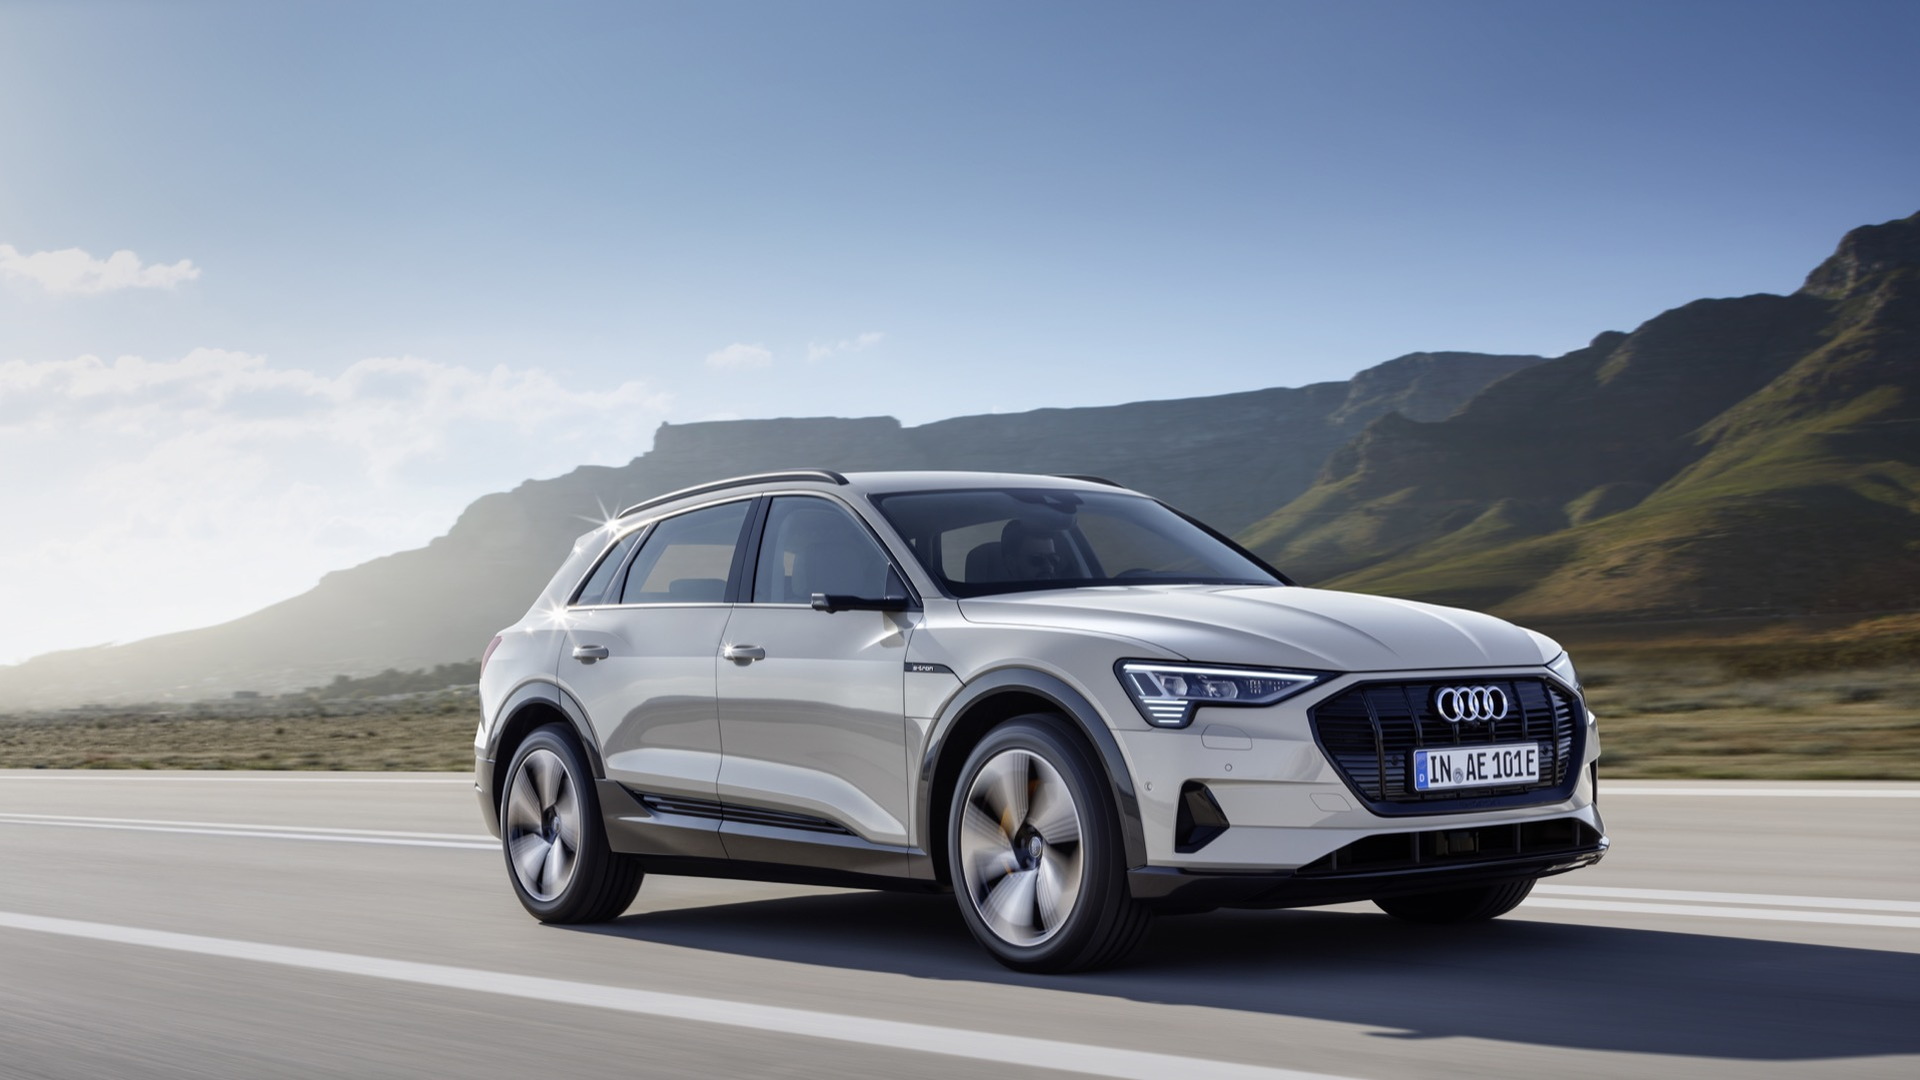 Woud Oh teller 2019 Audi e-tron EPA range revealed: Nothing to brag about, but aiming for  the real world?